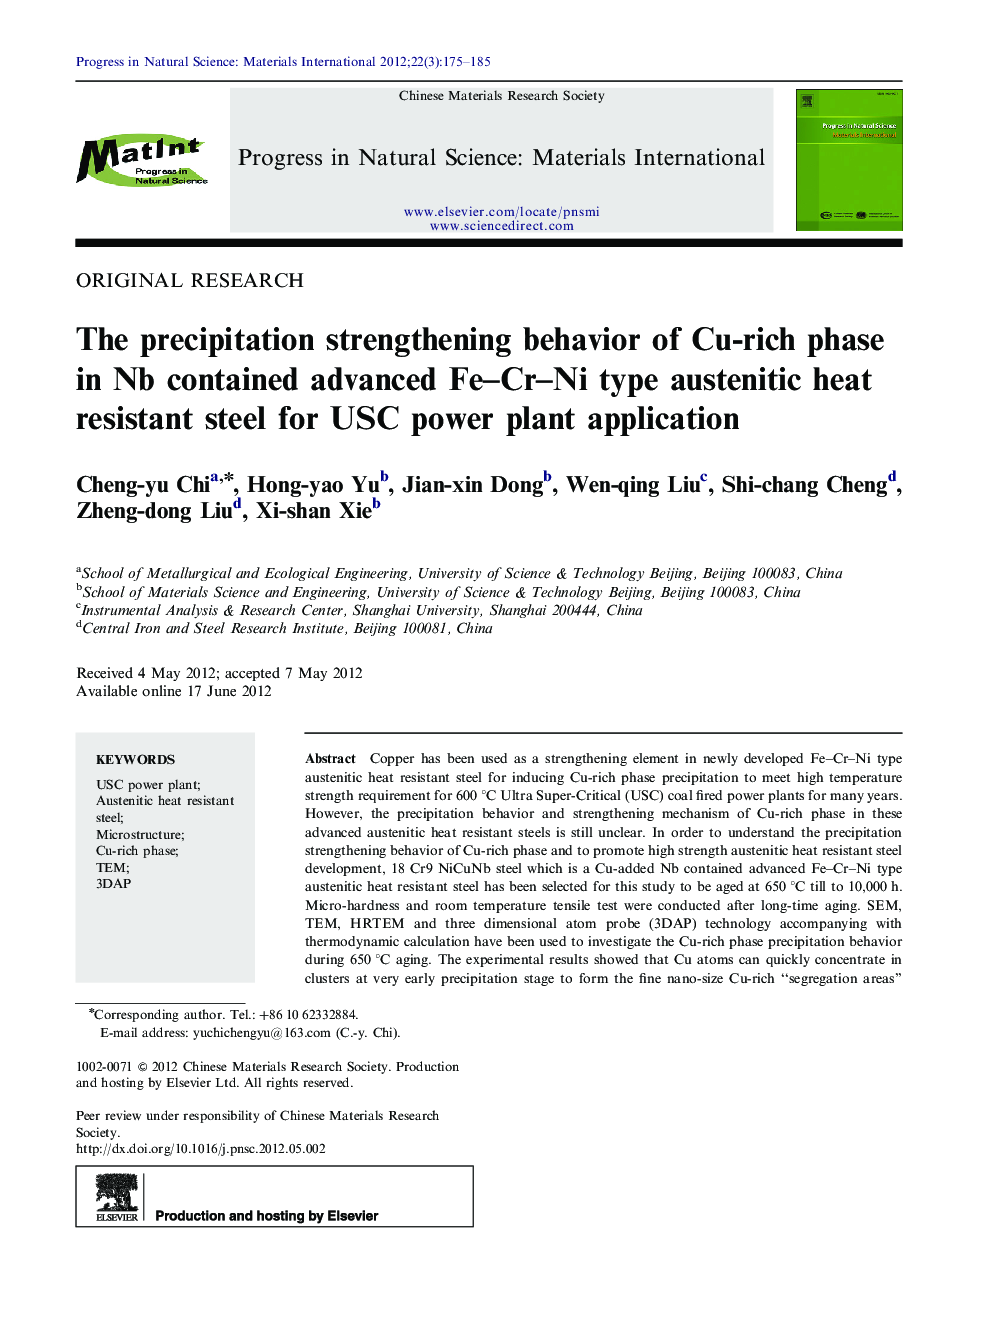 The precipitation strengthening behavior of Cu-rich phase in Nb contained advanced Fe–Cr–Ni type austenitic heat resistant steel for USC power plant application